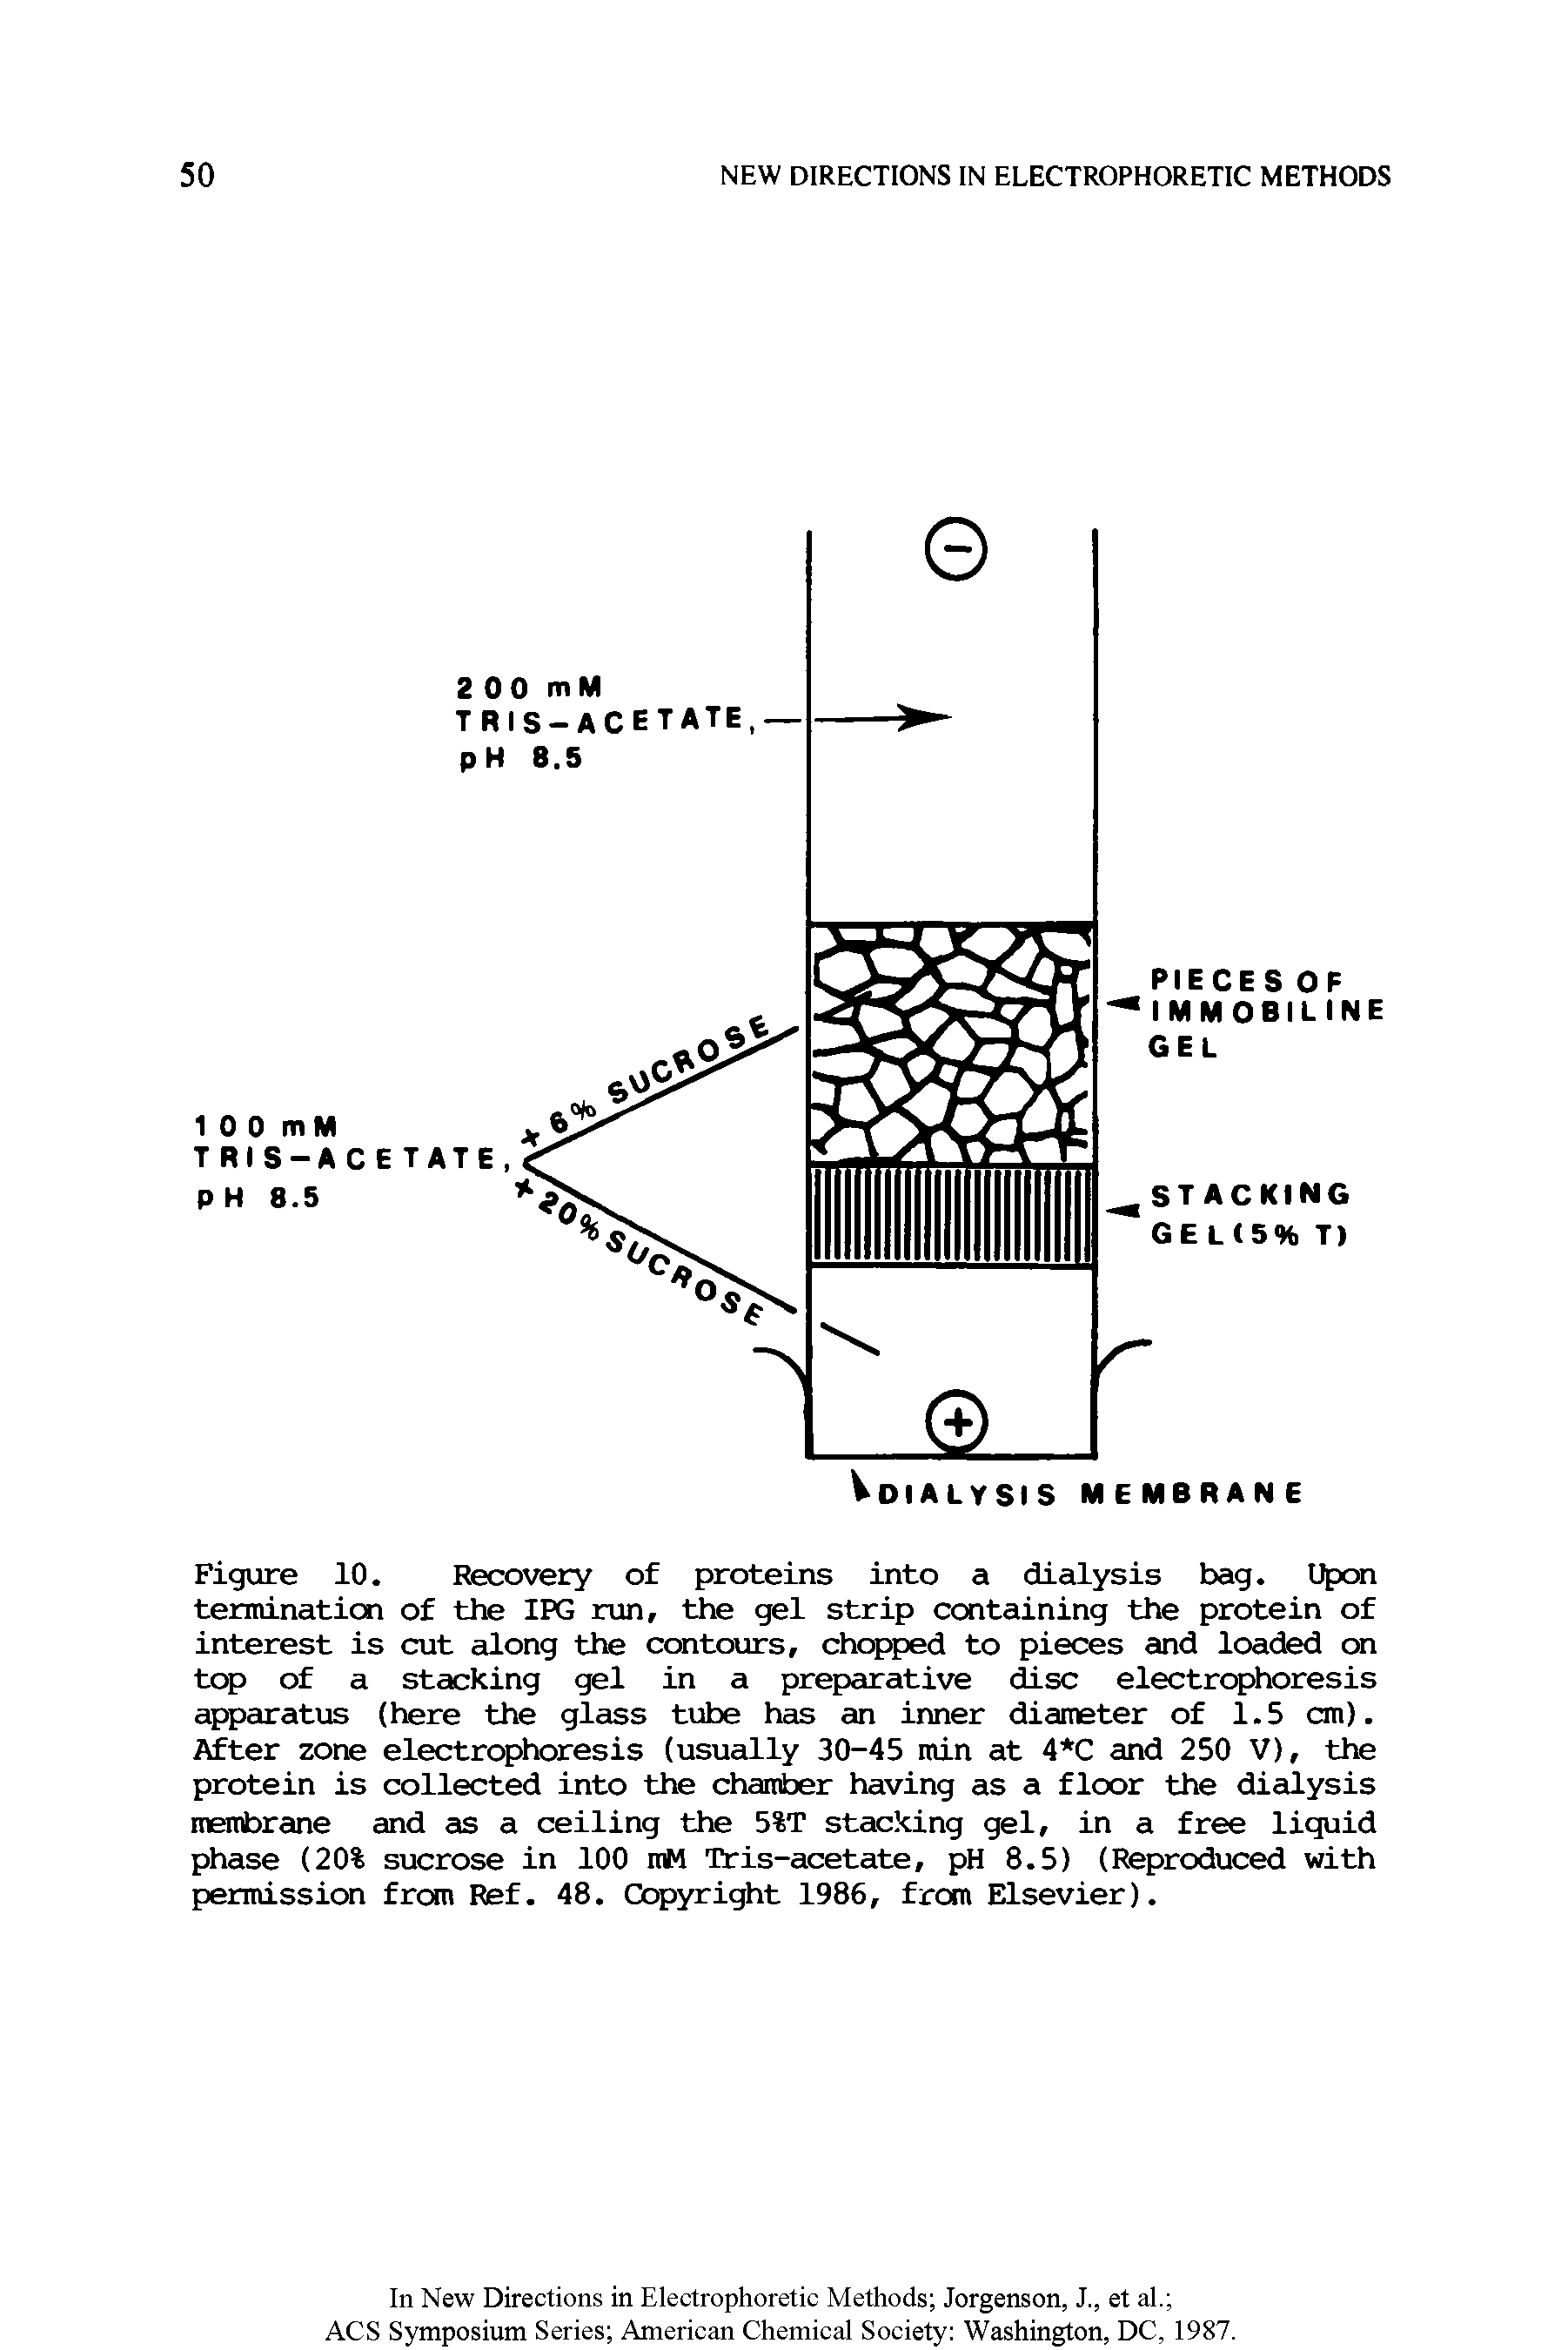 Figure 10. Recovery of proteins into a dialysis bag. Upon terminaticn of the IPG run, the gel strip containing the protein of interest is cut along the contours, chopped to pieces and loaded on top of a stacking gel in a preparative disc electrophoresis apparatias (here the glass tube has an inner diameter of 1.5 cm). After zone electrophoresis (usually 30-45 min at 4 C and 250 V), the protein is collected into the chamber having as a floor the dialysis membrane and as a ceiling the 5%T stacking gel, in a free liquid phase (20% sucrose in 100 mM Tris-acetate, pH 8.5) (Reproduced with permission from Ref. 48. copyright 1986, from Elsevier).